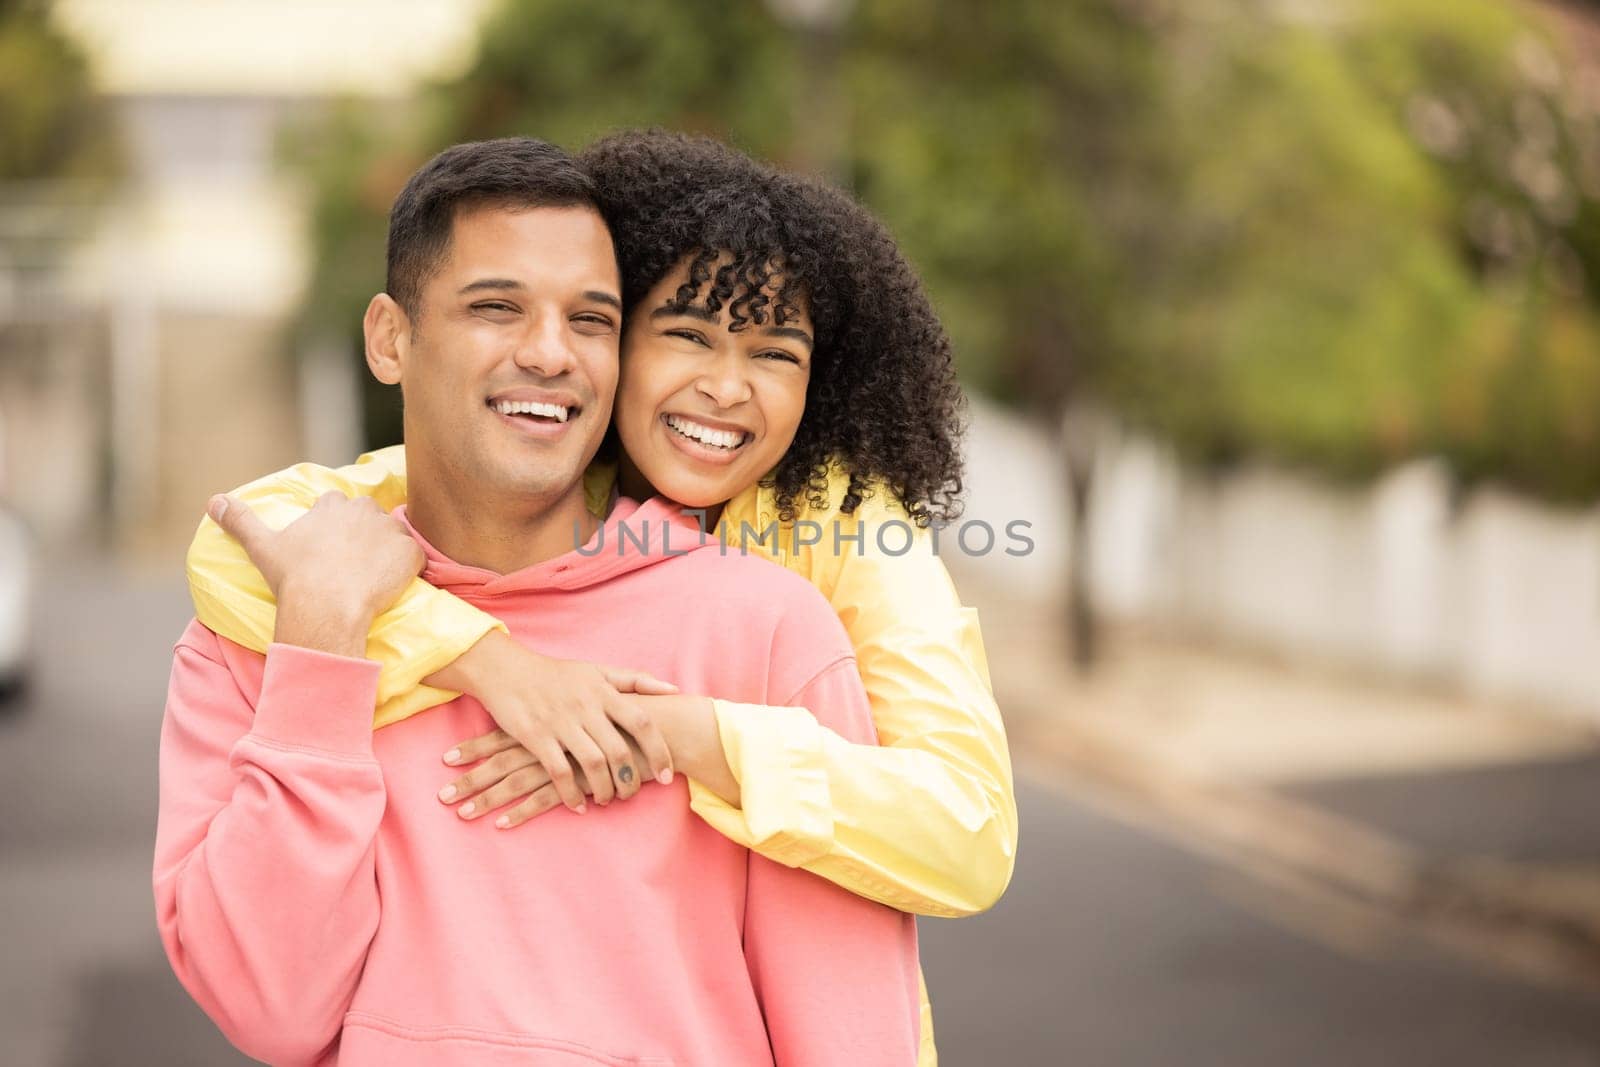 Black couple, smile and hug portrait of young people with love, care and bonding outdoor. Happy woman, man and summer fun of people on a street walking with happiness on vacation smiling together.